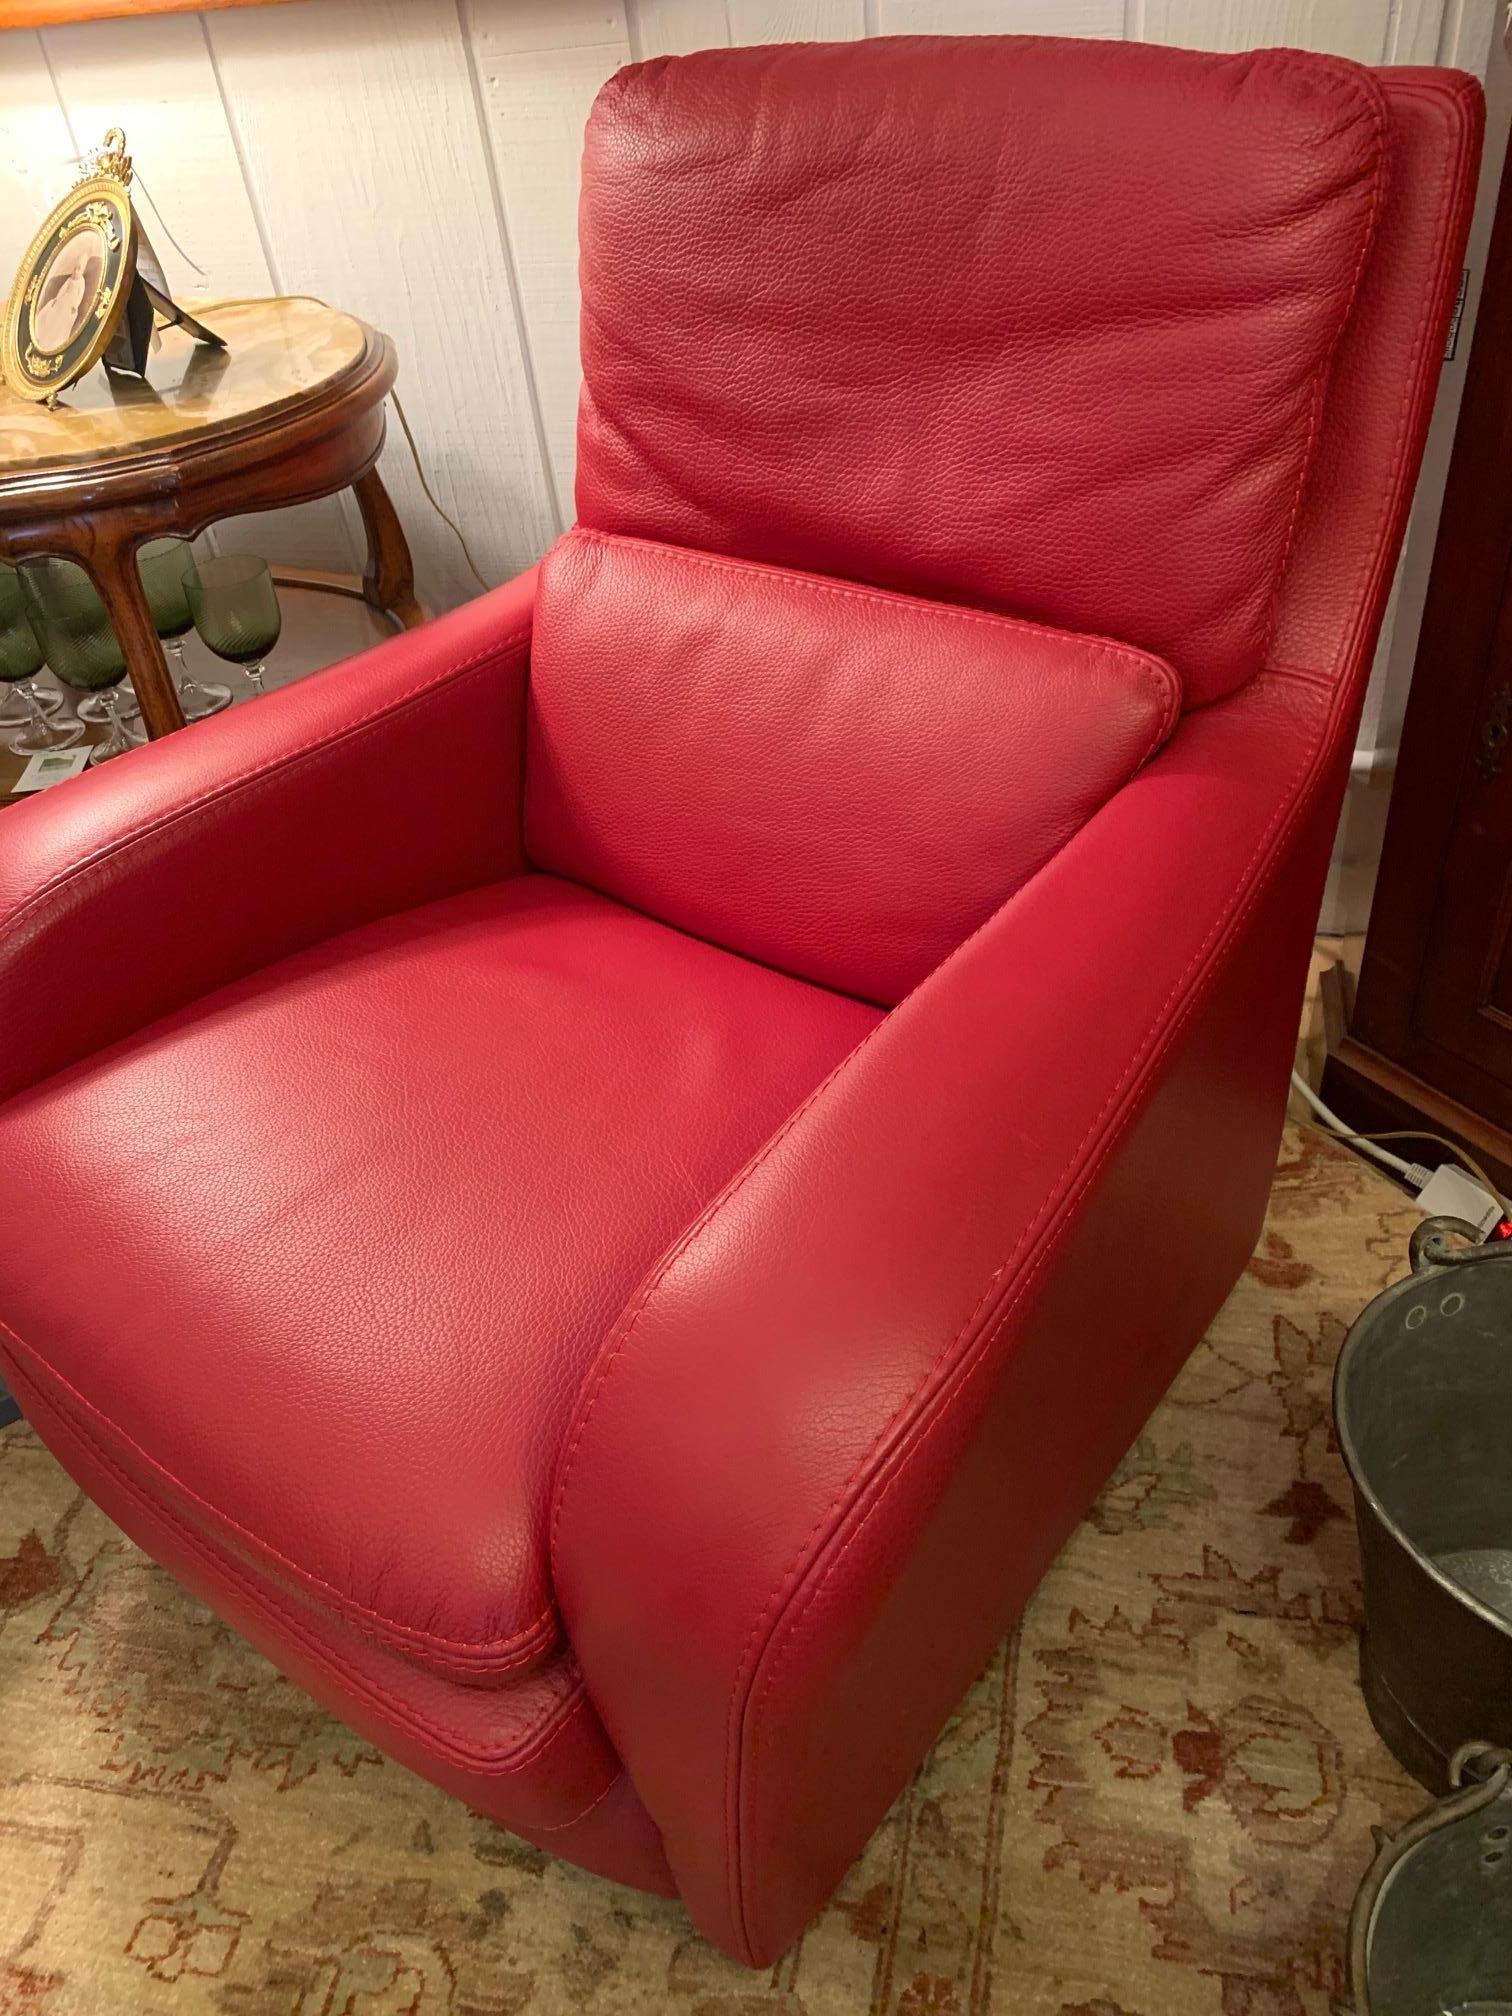 A super chic Roche Bobois Italian buttery leather swivel club chair that has wheels on feet and sensational rasberry red color.